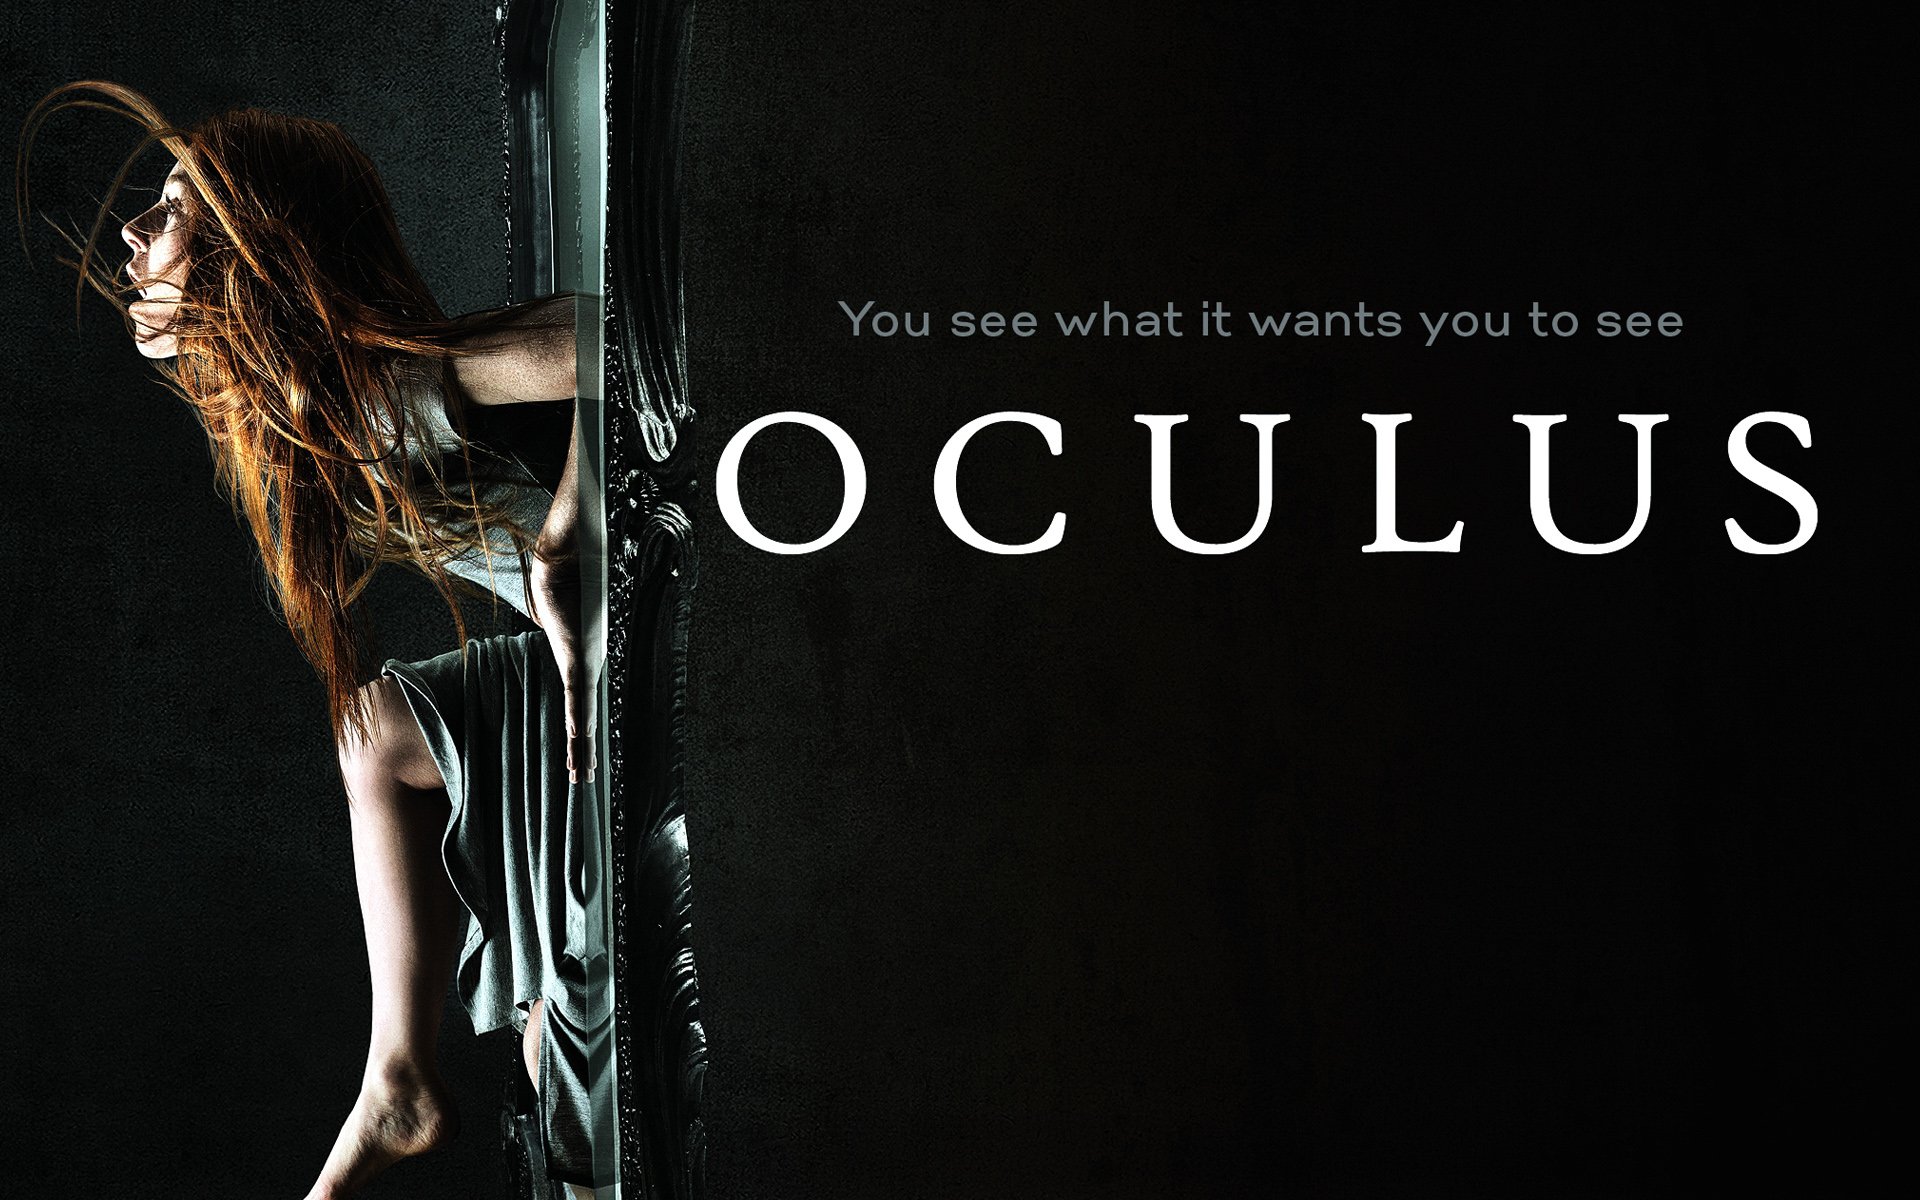 Oculus 2014 Horror Movie Wallpapers HD Wallpapers 1920x1200